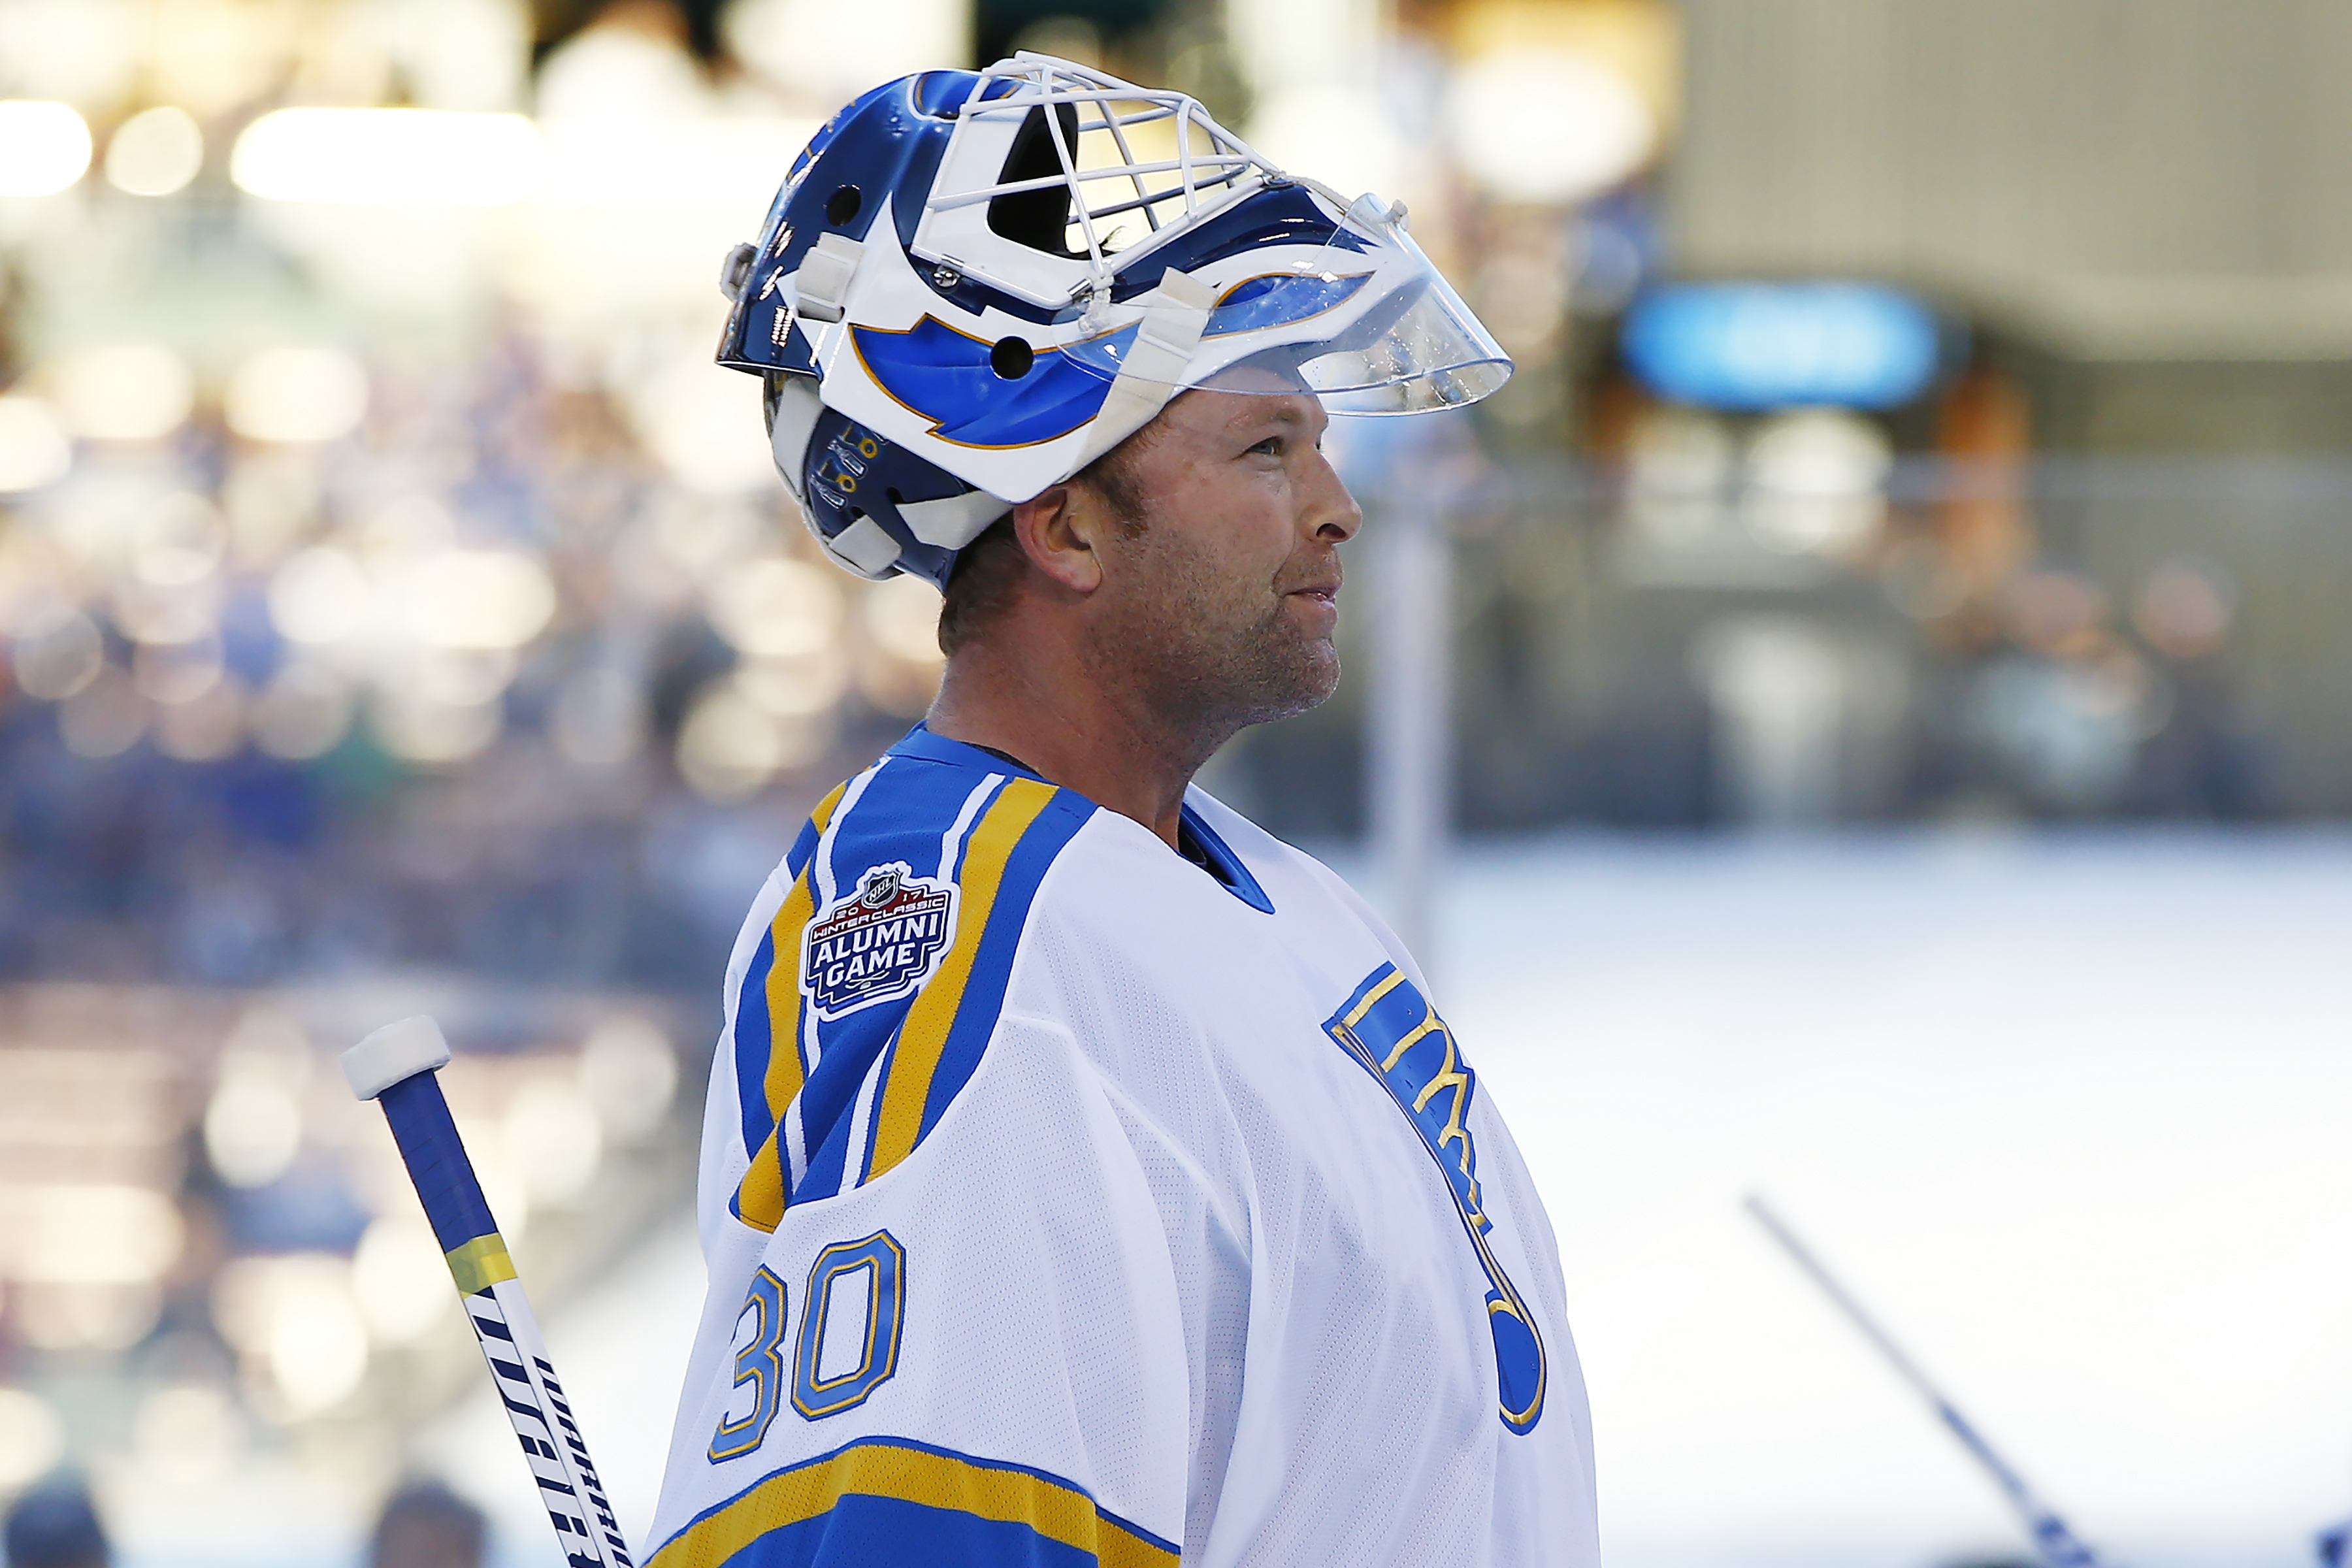 Martin Brodeur retires from the NHL - The Boston Globe